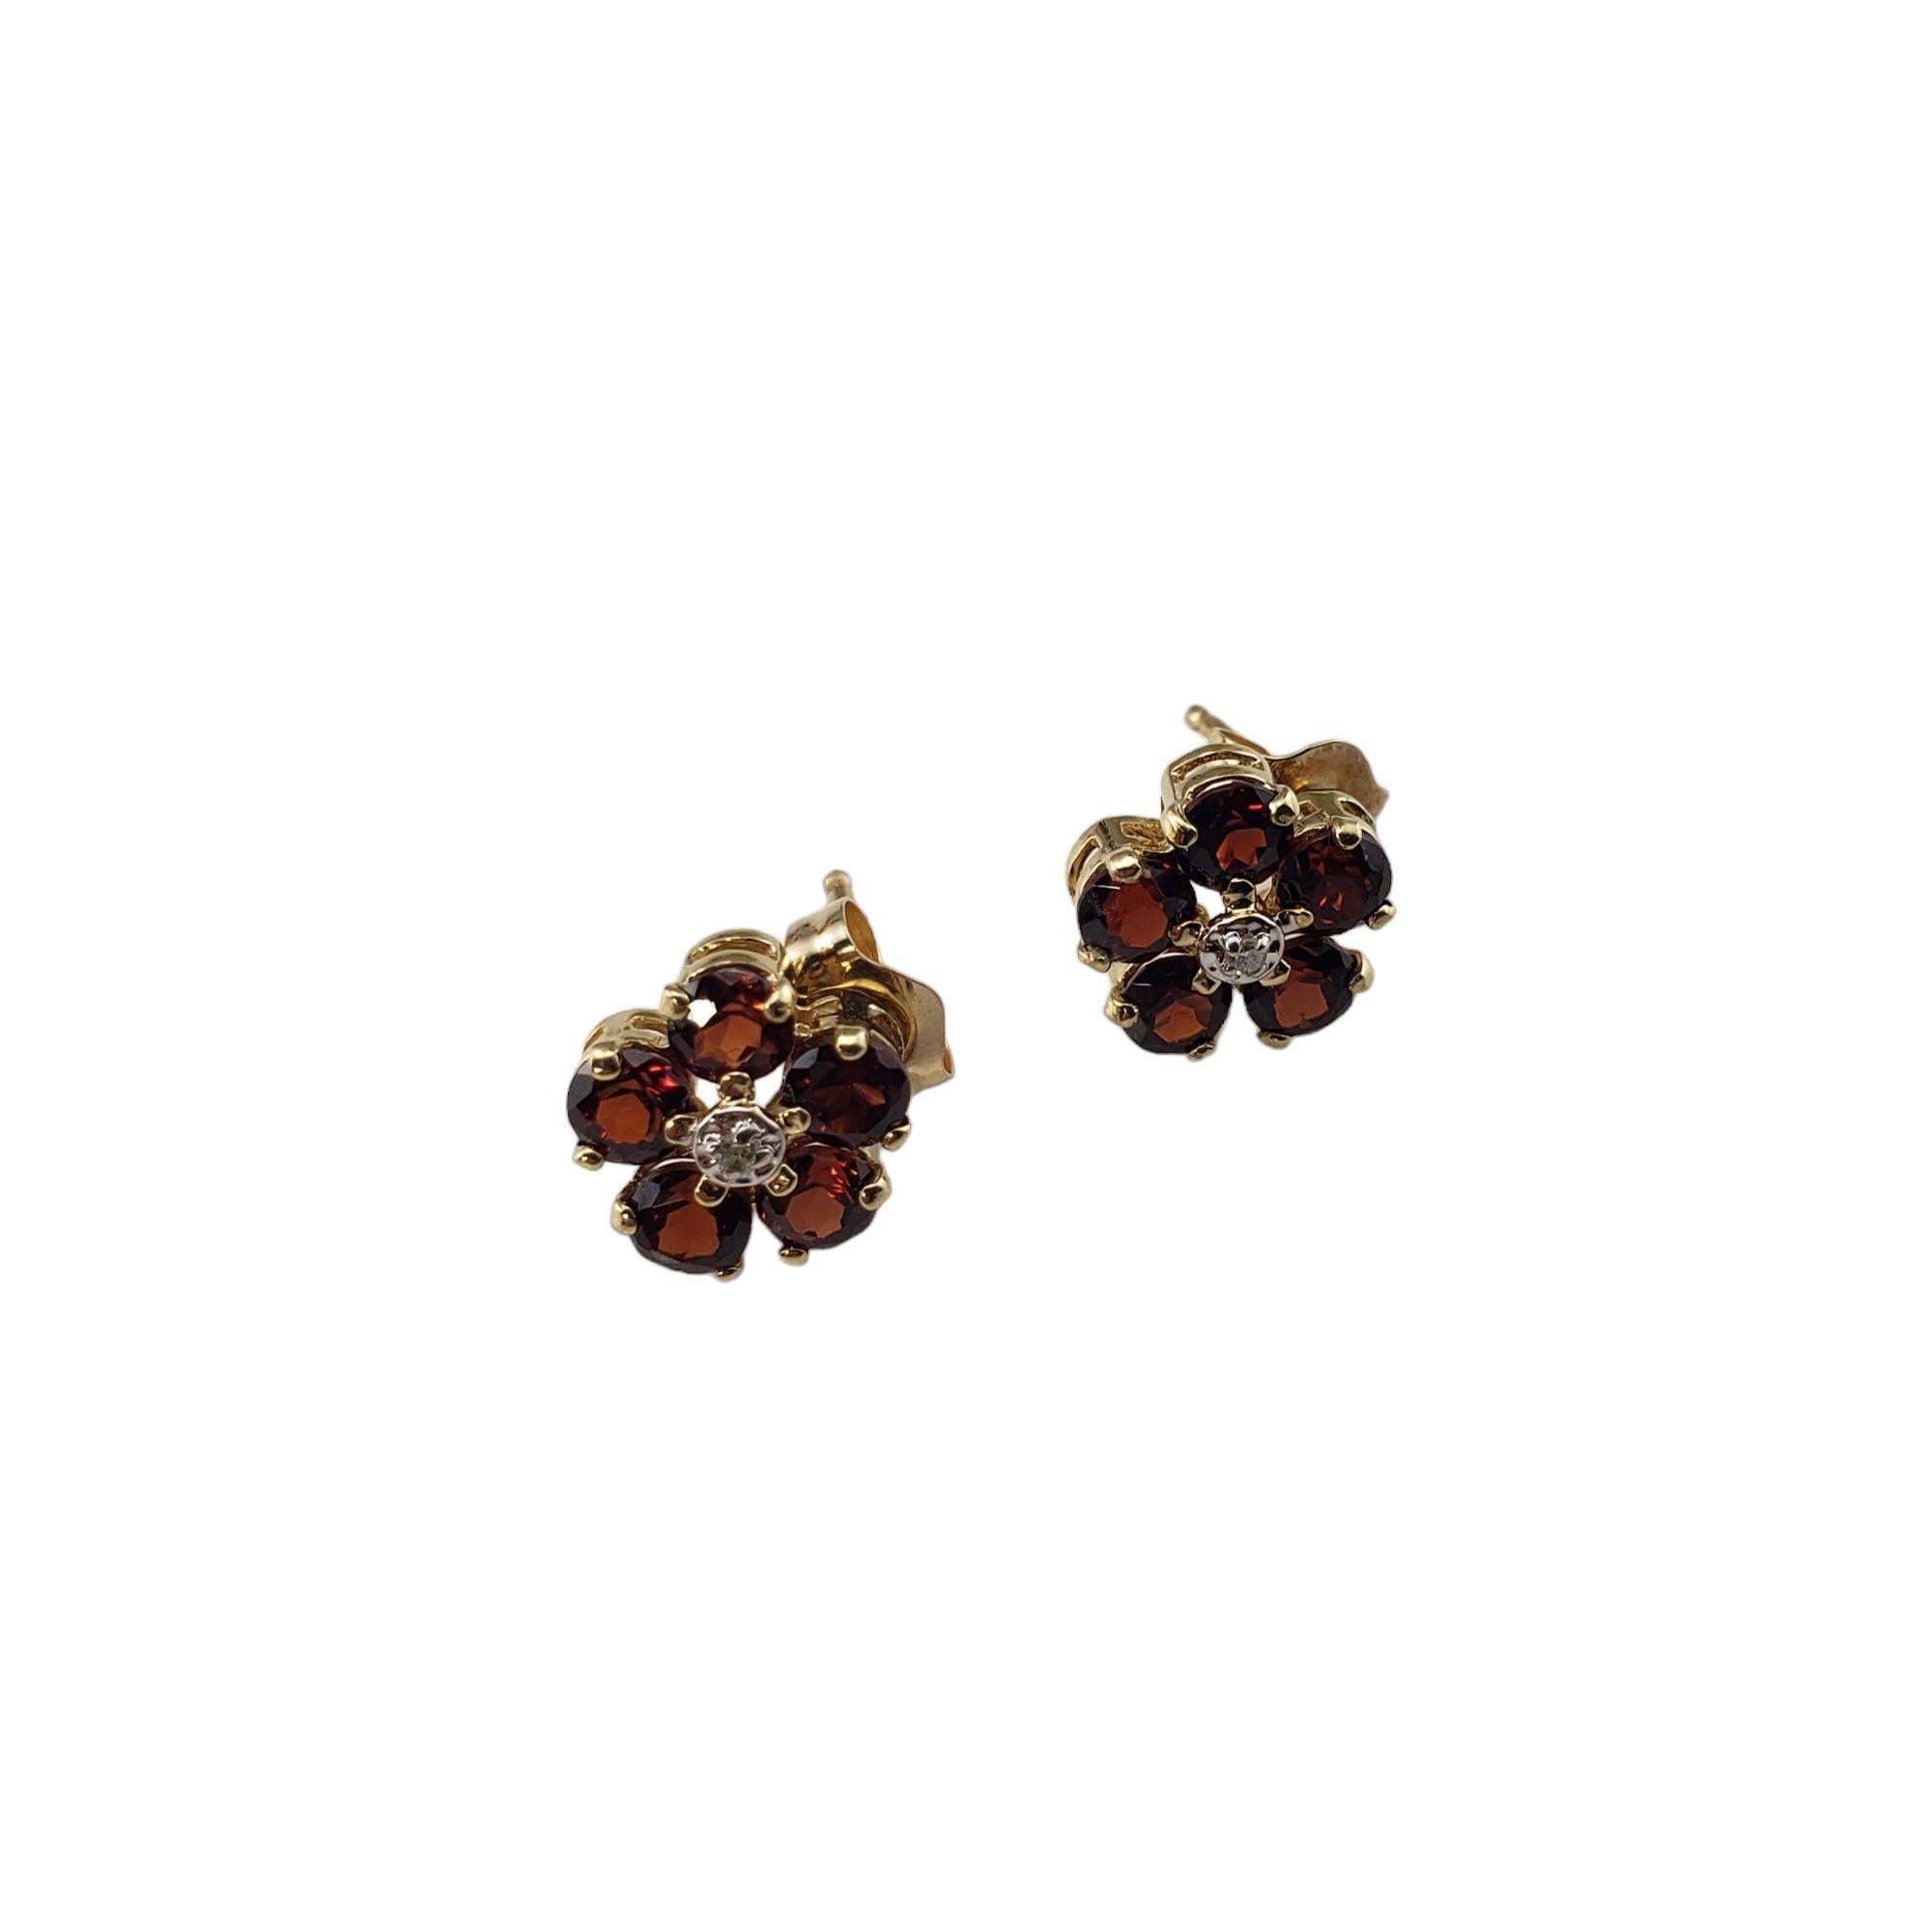 Vintage 14K Yellow Gold Almandine Garnet and Diamond Earrings-

These stunning earrings each feature five round almandine garnets and two round one round single cut diamond set in classic 14K yellow gold.  Push back closures.

Approximate total